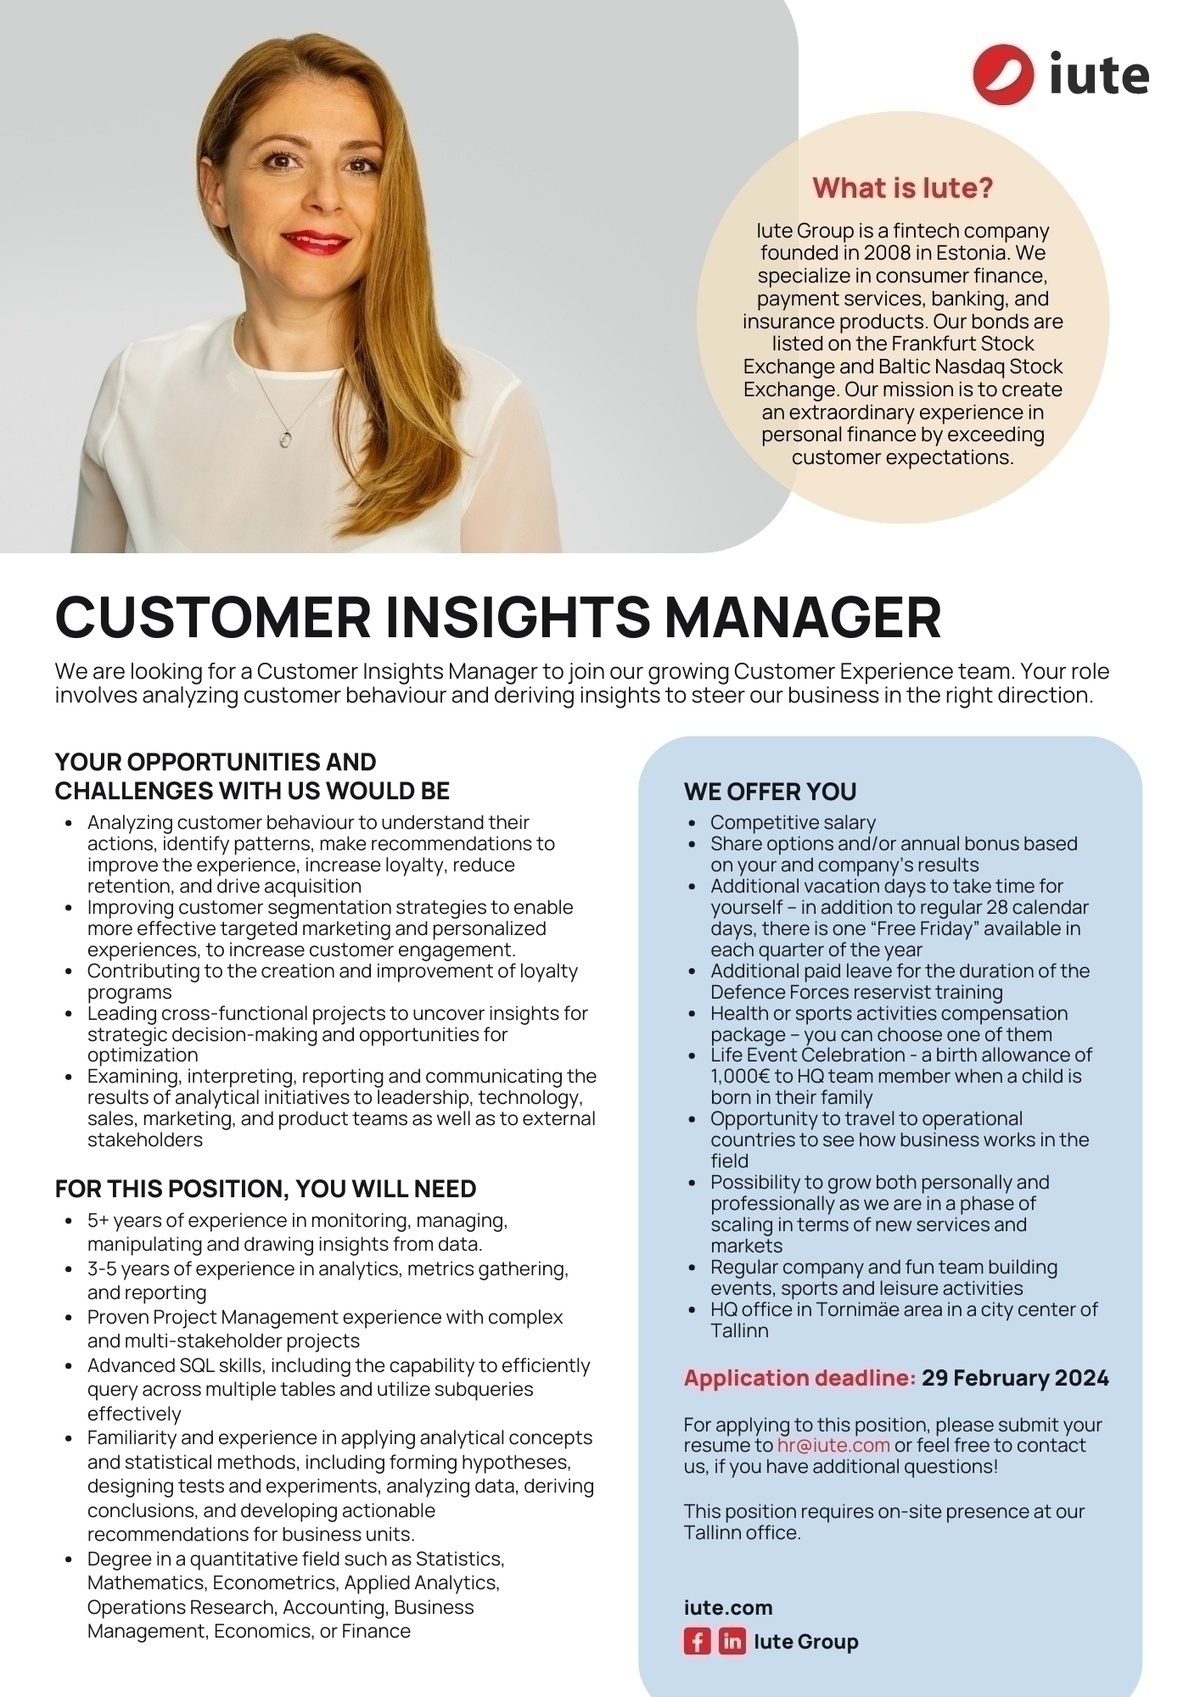 IUTE GROUP AS CUSTOMER INSIGHTS MANAGER